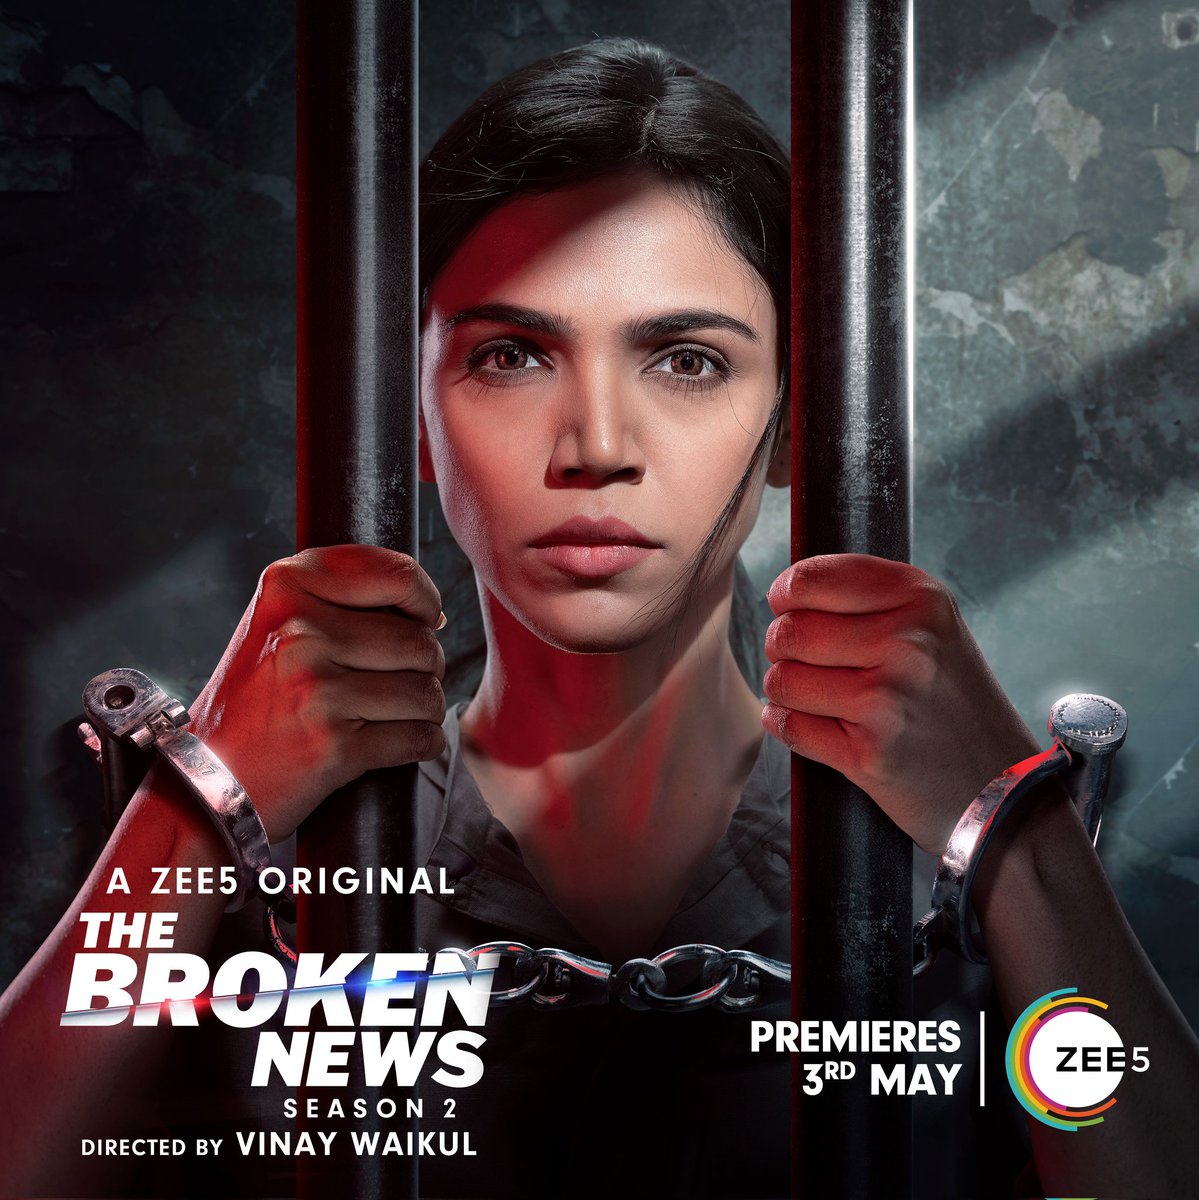 New poster of #ShriyaPilgaonkar from her upcoming series #TheBrokenNewsS2.

Also features #SonaliBendre and #JaideepAhalawat.

3rd May 2024 premiere on #Zee5

#TheBrokenNewsS2OnZee5